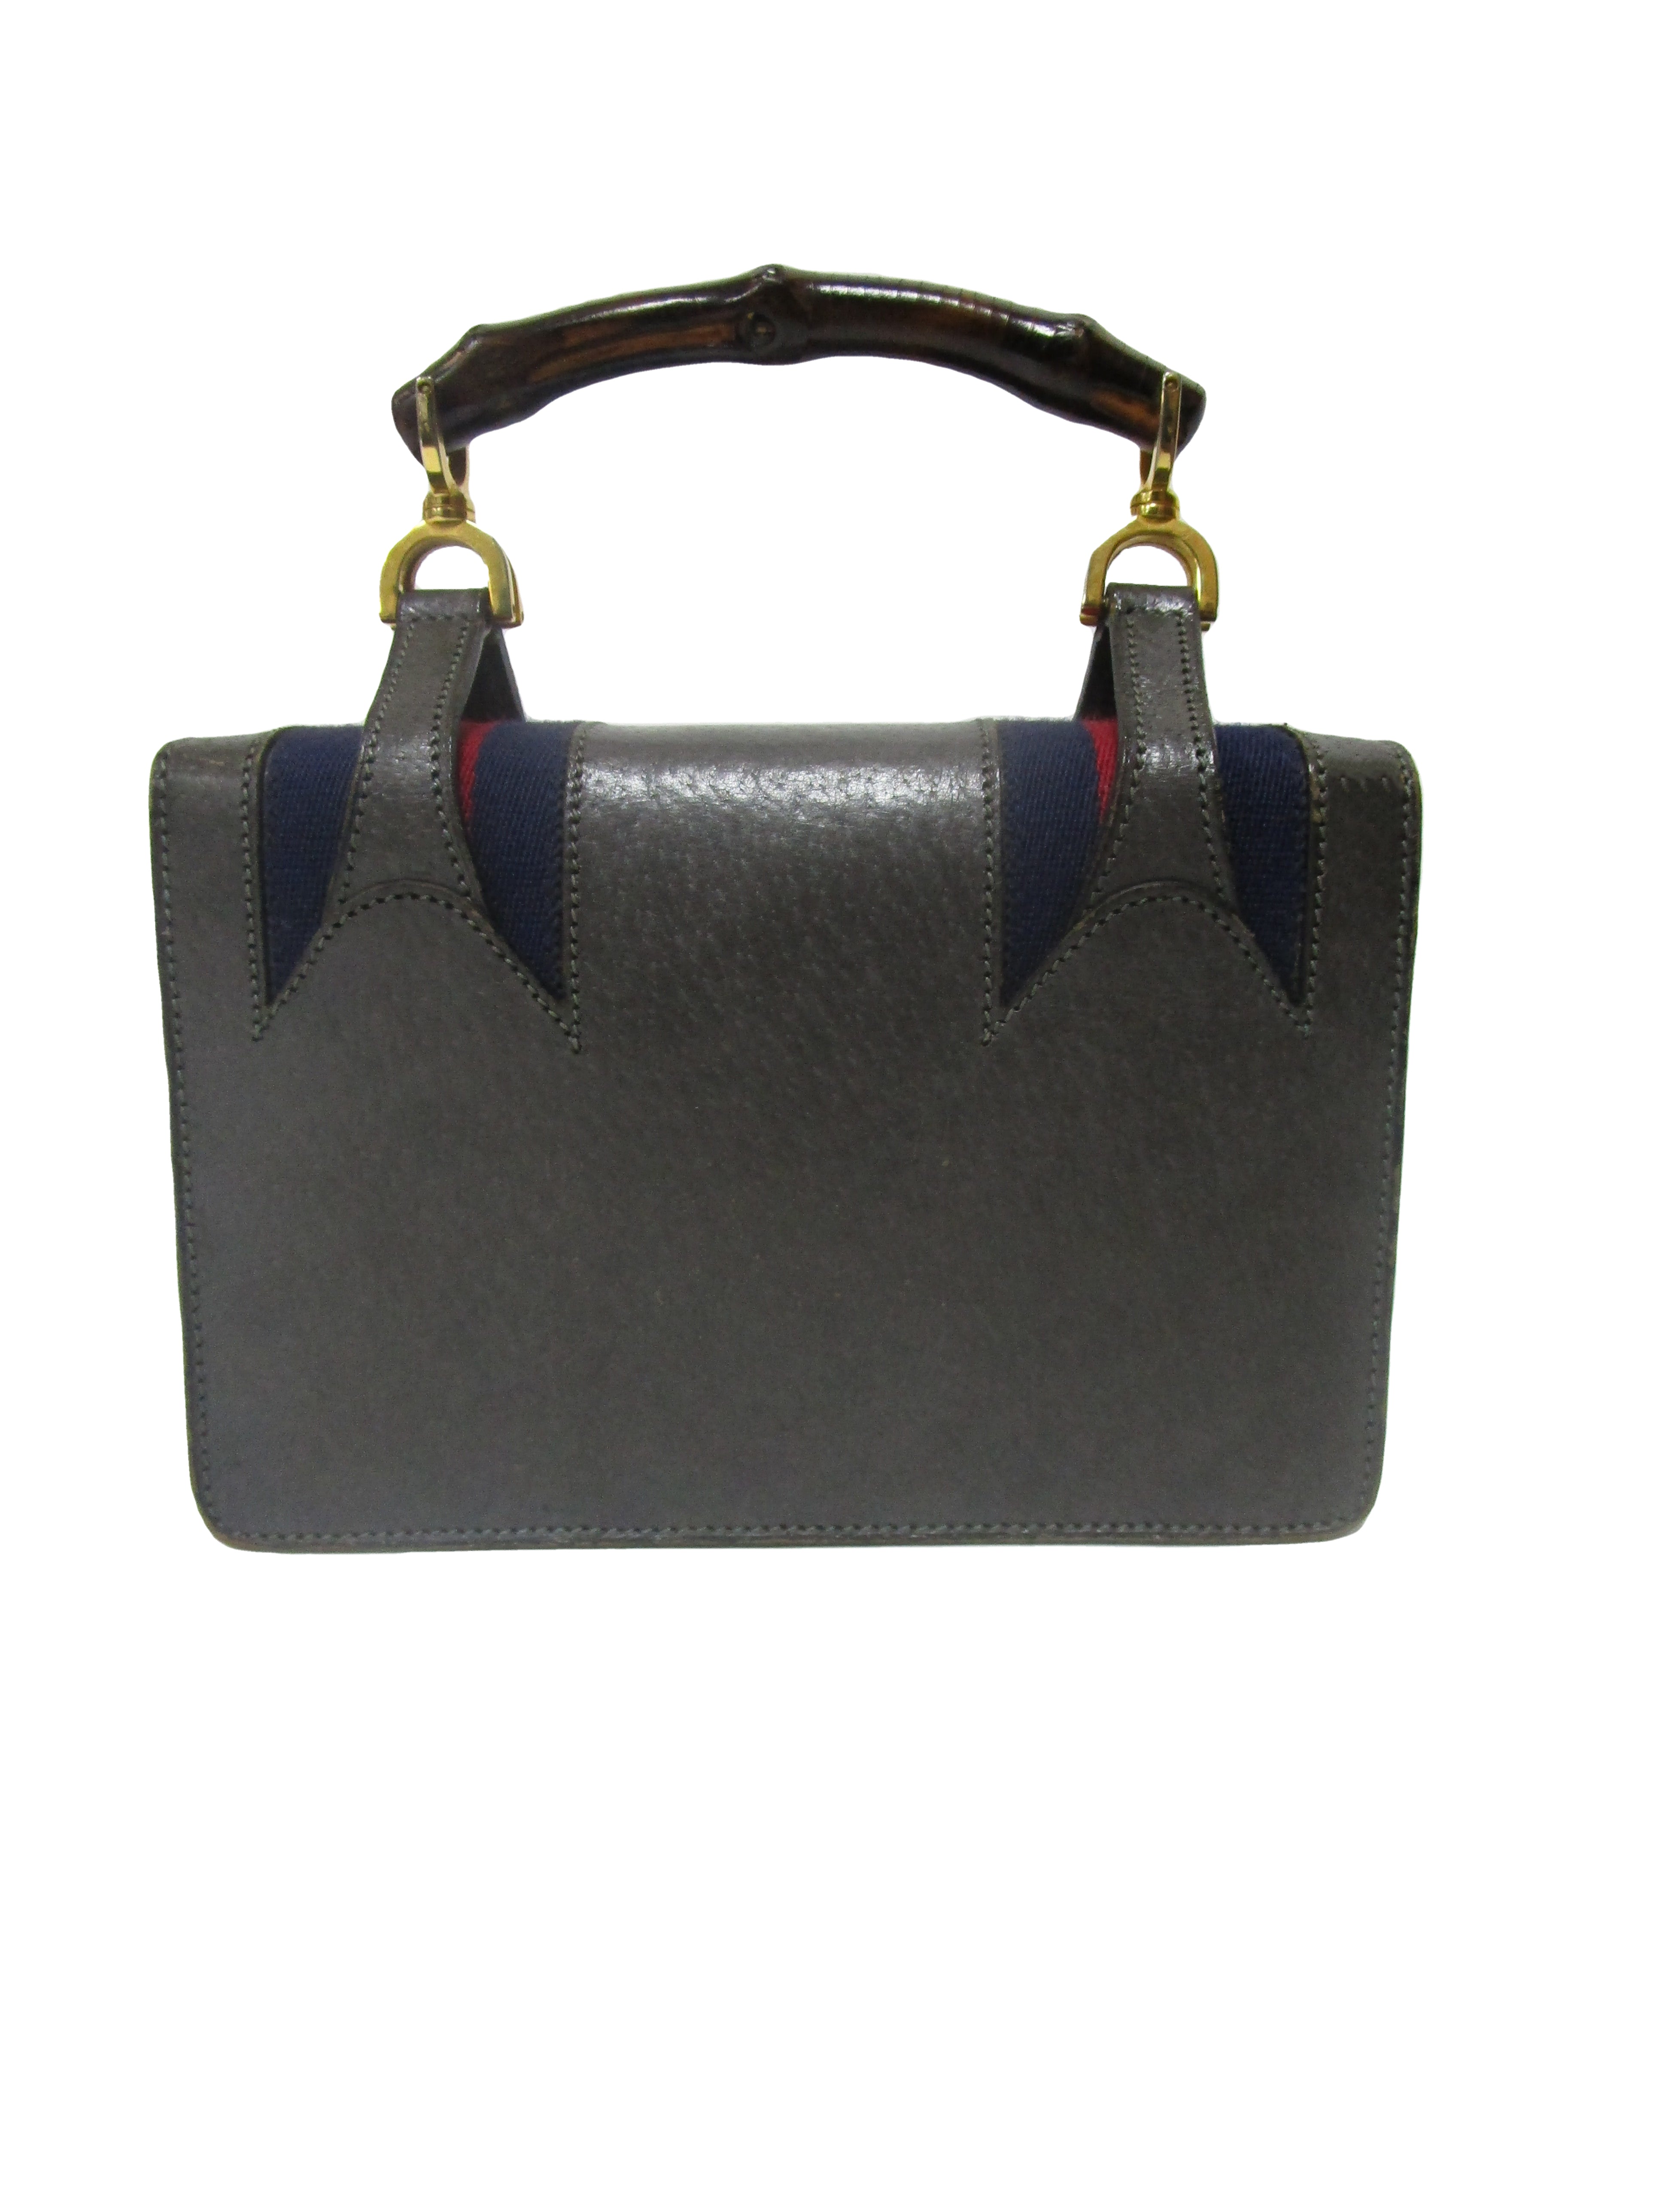 1970s Gucci Grey Blue and Navy Hand Bag